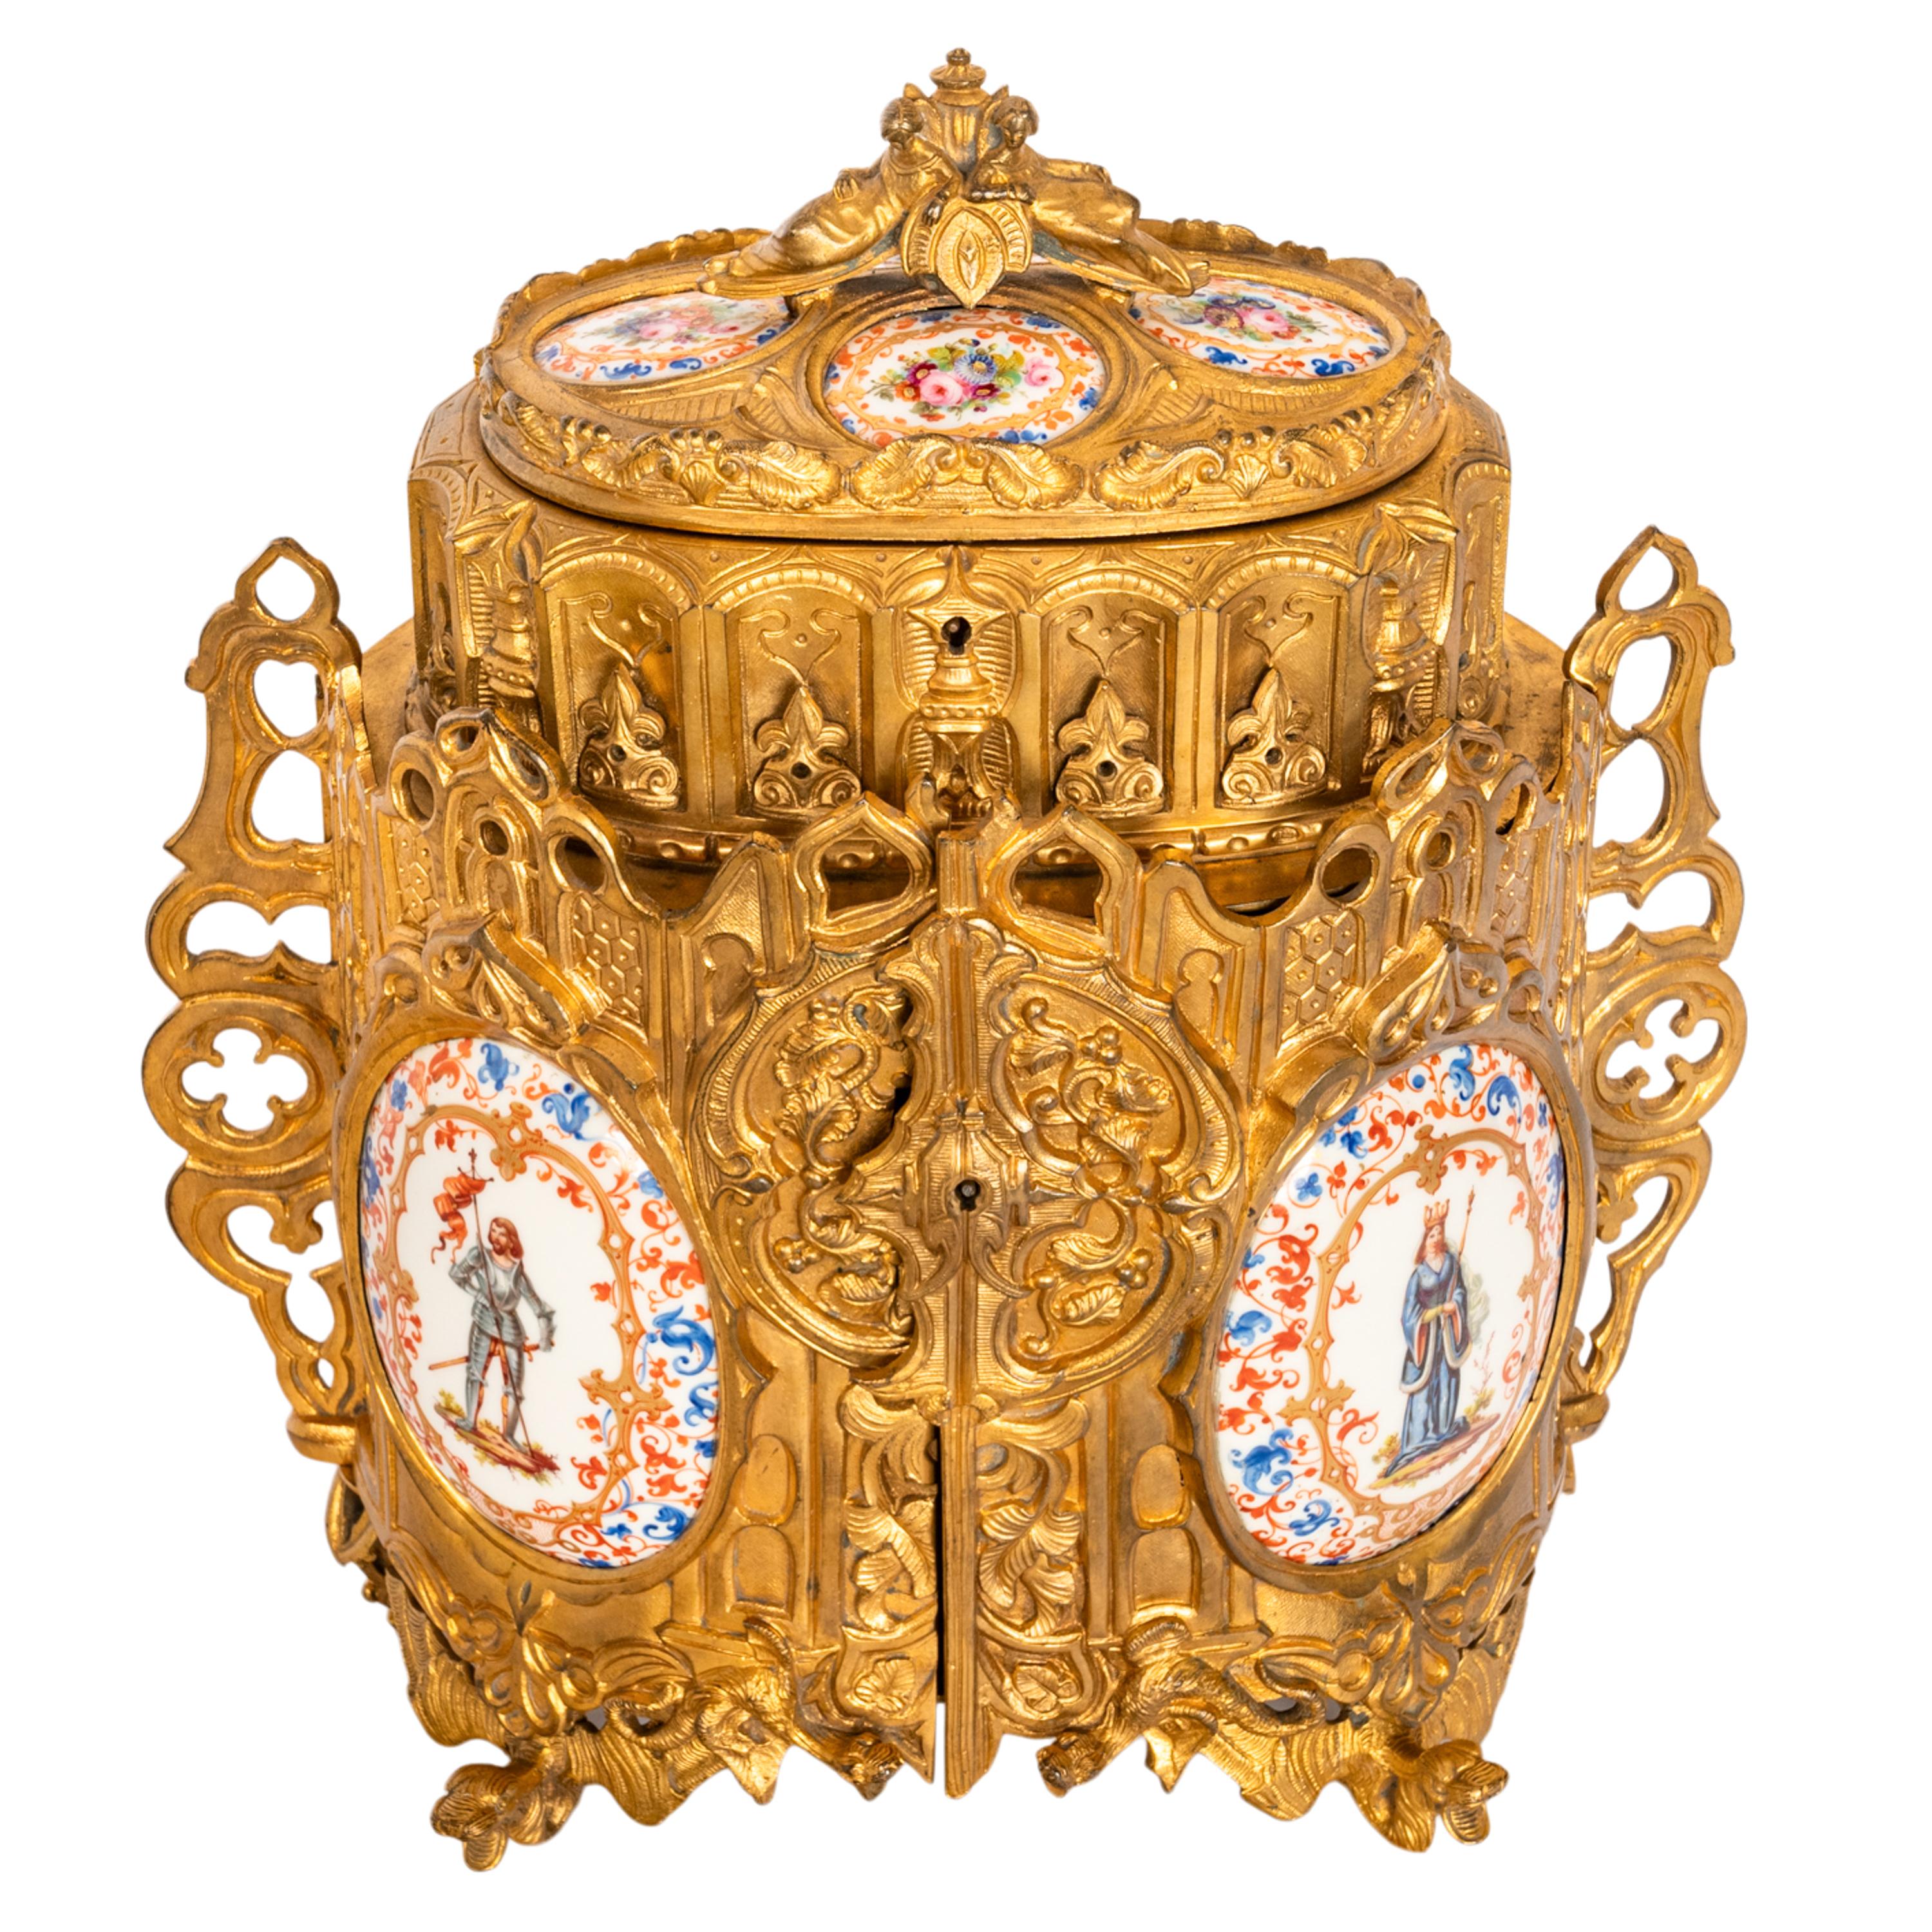 A fine antique French Gothic Revival/Medieval gilt bronze jewelry casket, with prorcelain panels, circa 1870.
An identical jewelry casket sold on 1stdibs reference number LU155624346173, listed price $6,500.
The jewelry box is modeled on a